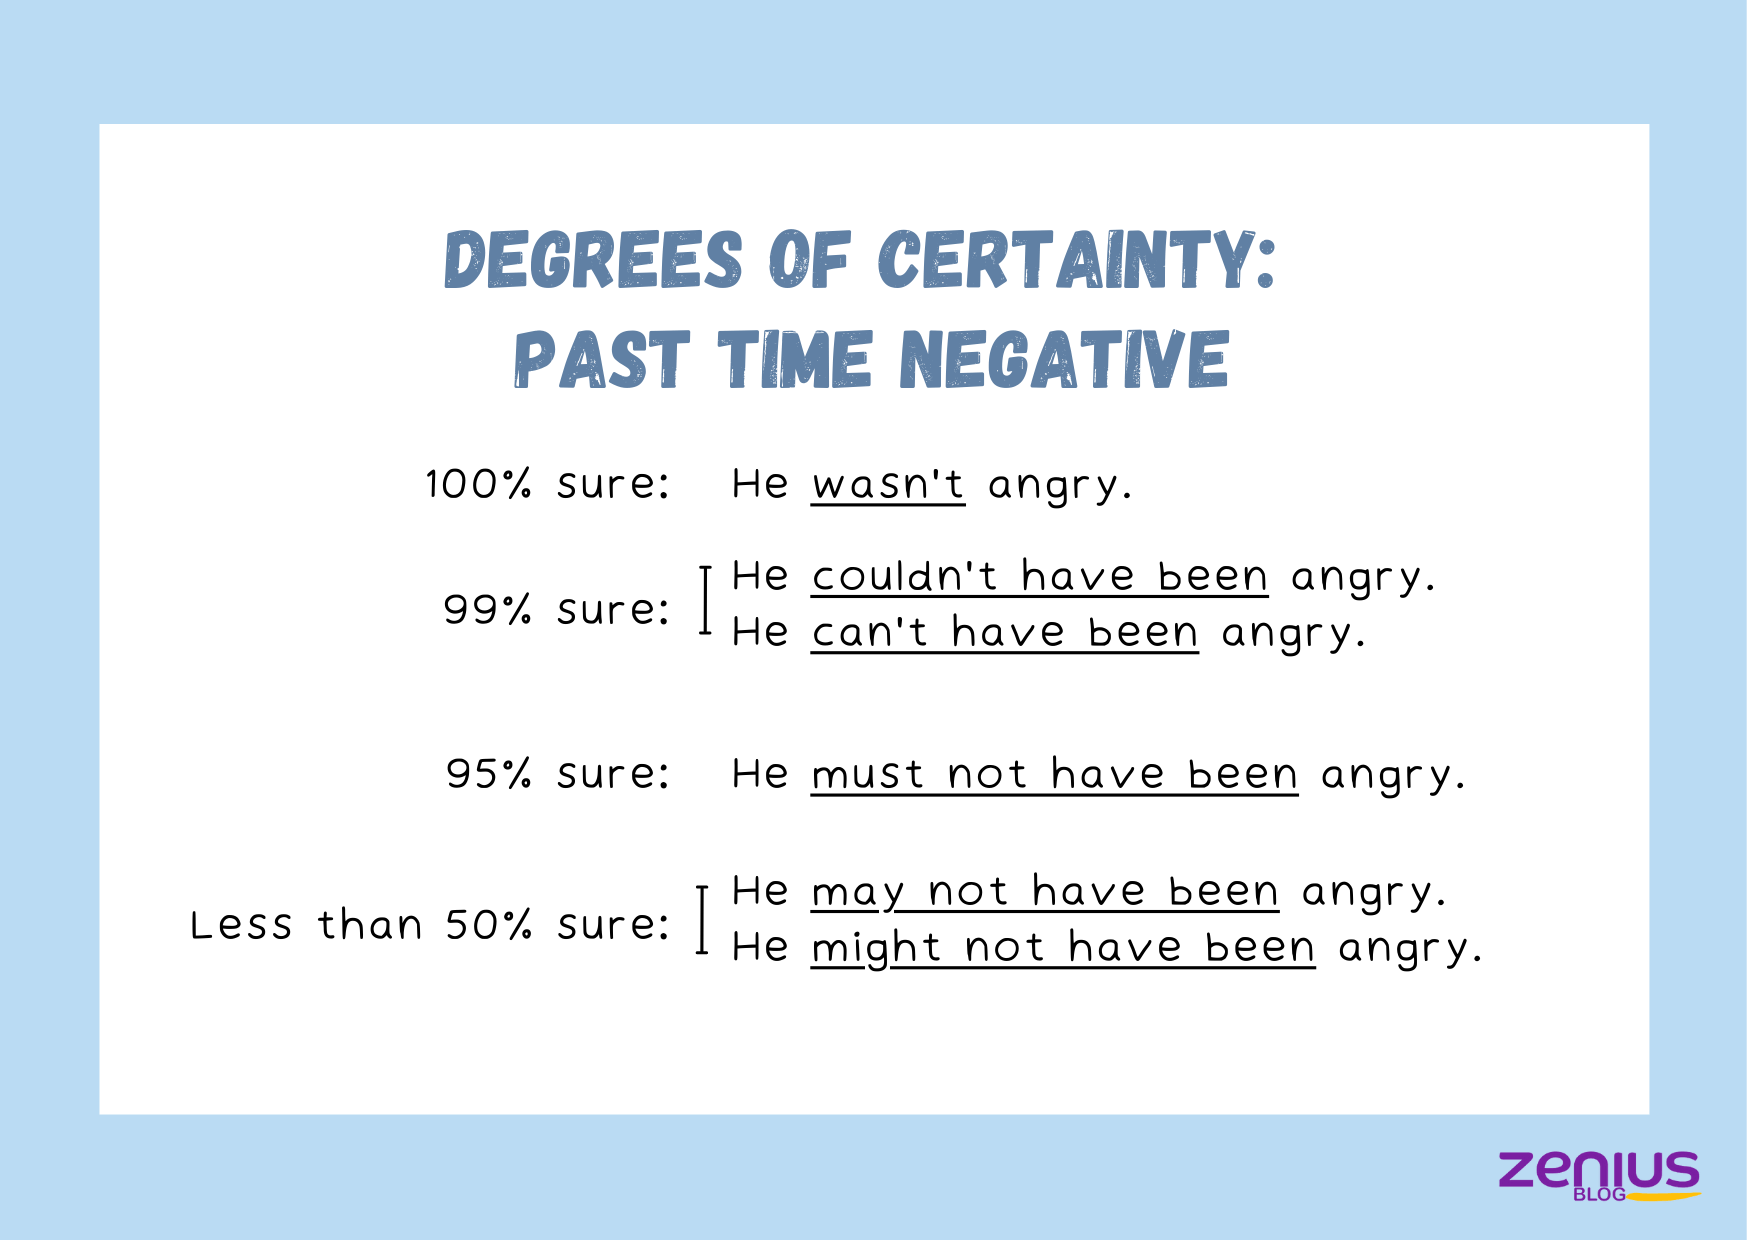 Making Prediction Degrees of Certainty Past Time Negative Zenius